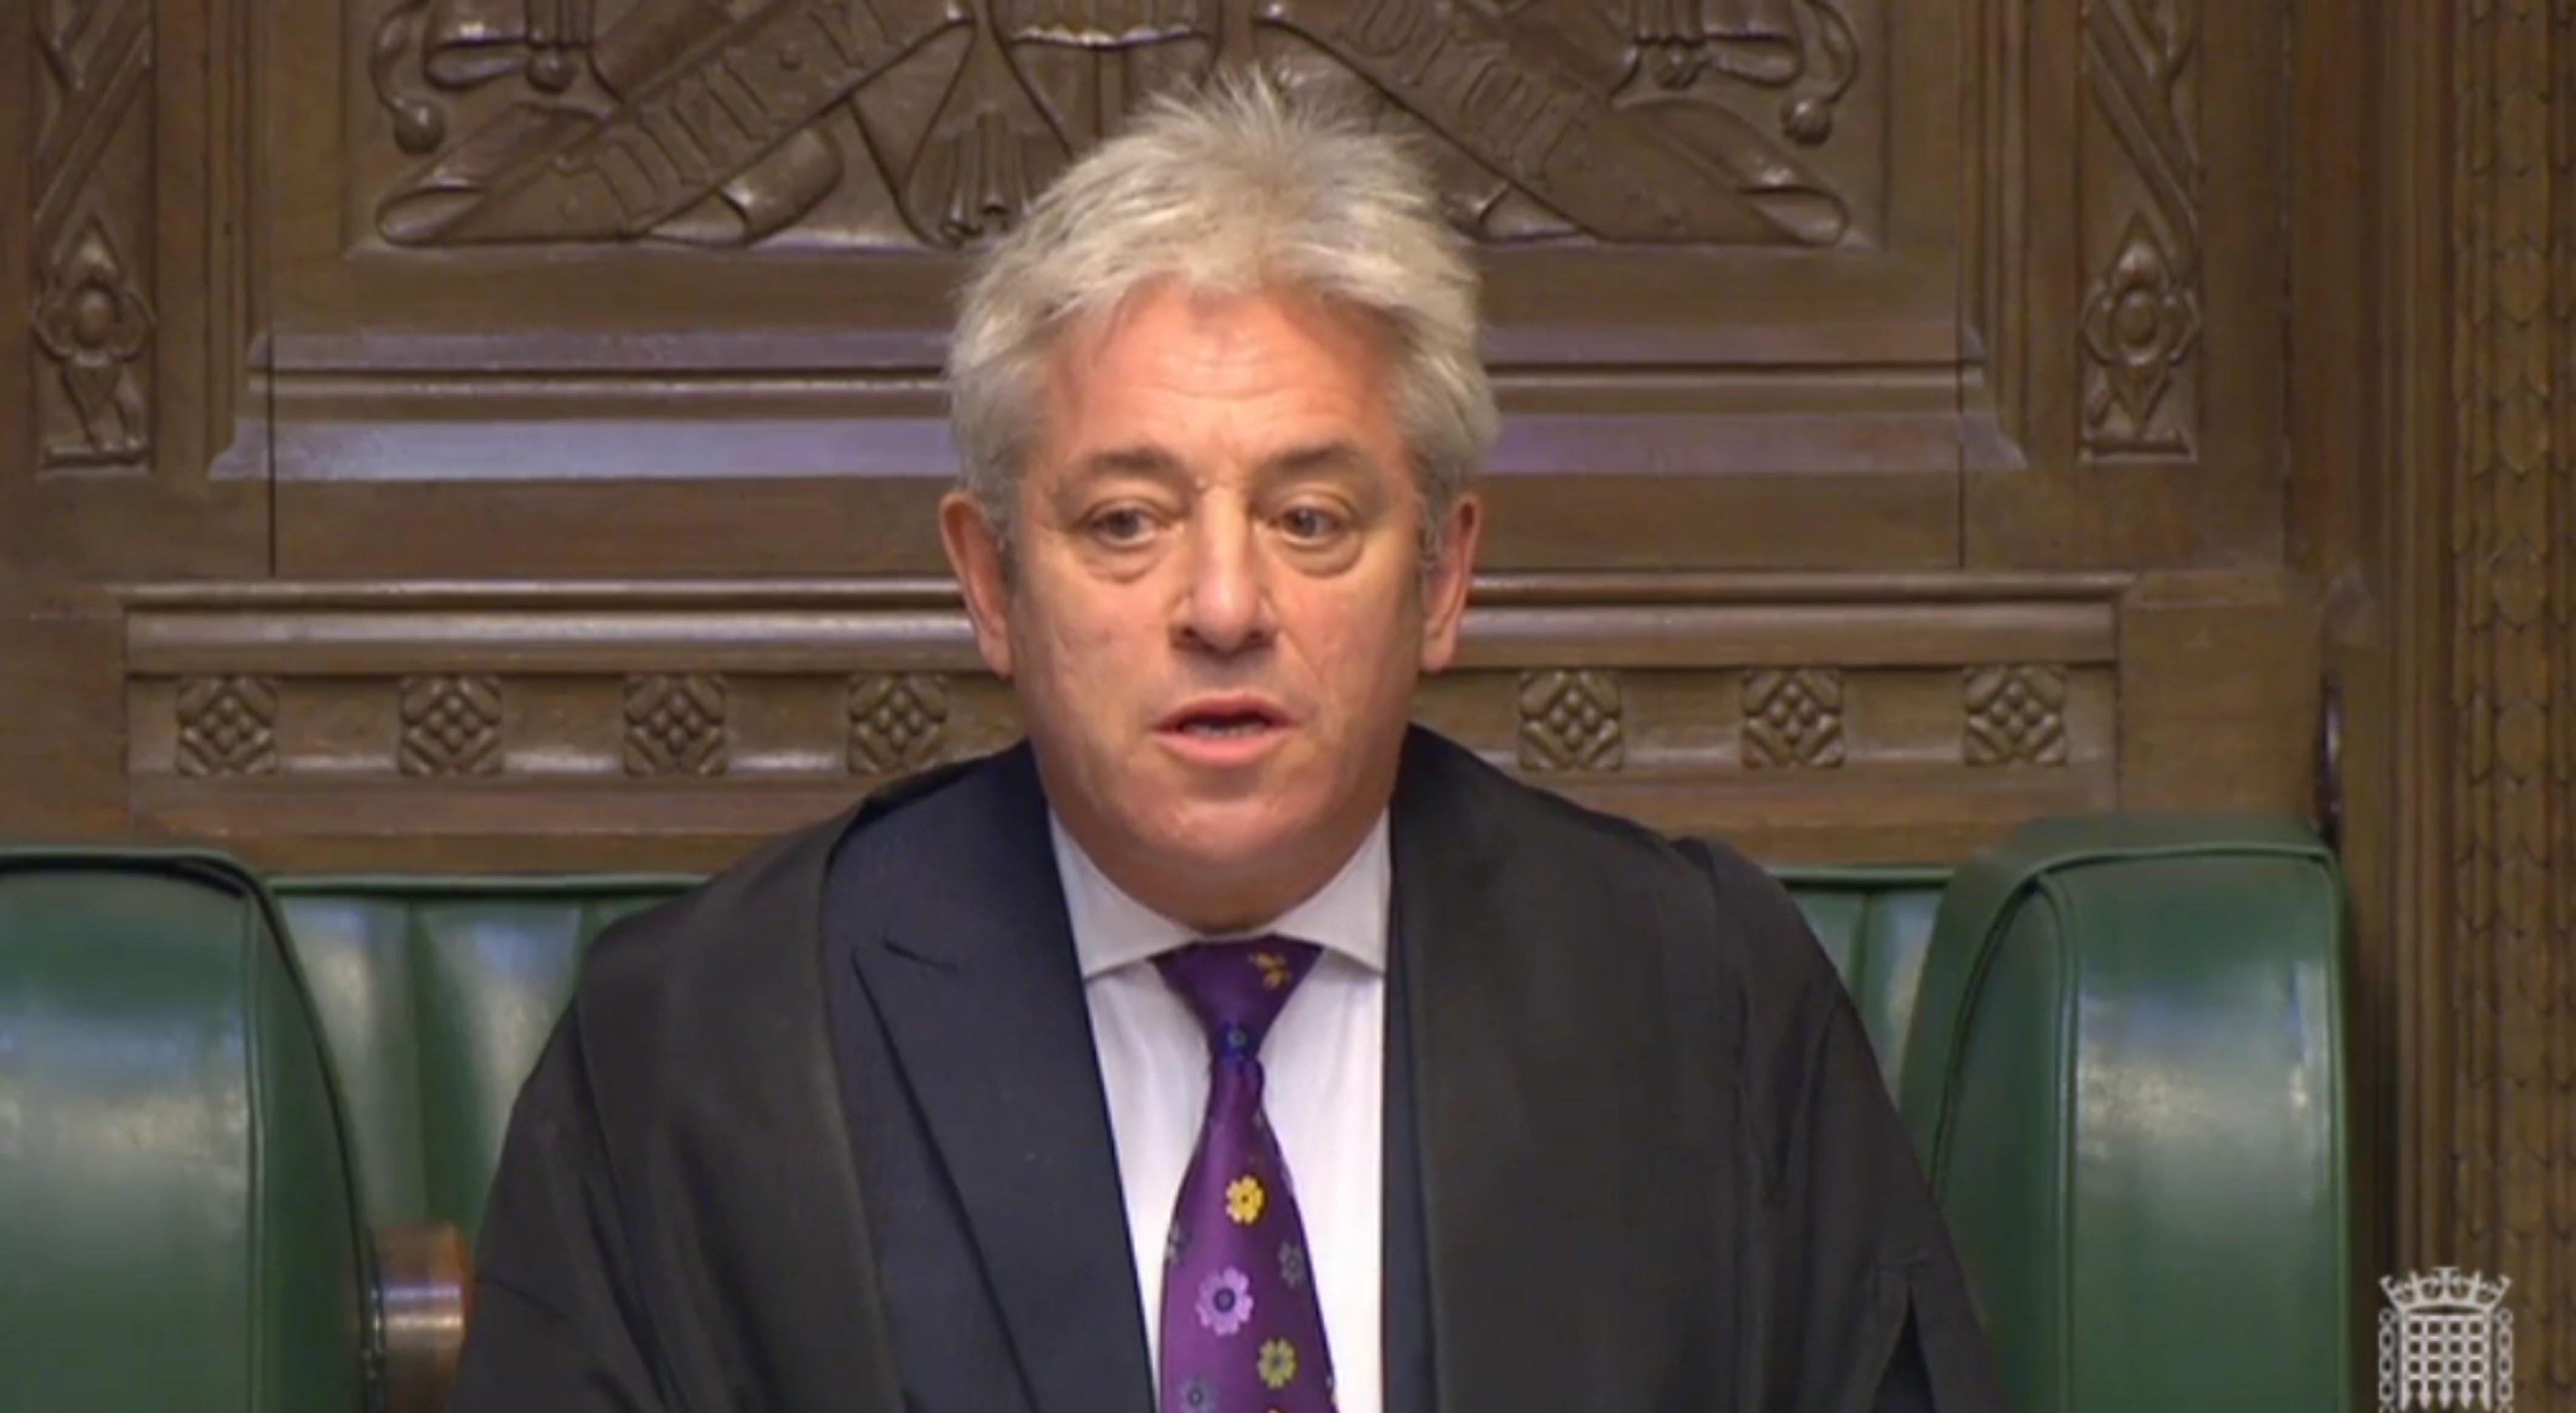 Speaker John Bercow said MPs must act swiftly to tackle sexual harassment in Parliament.